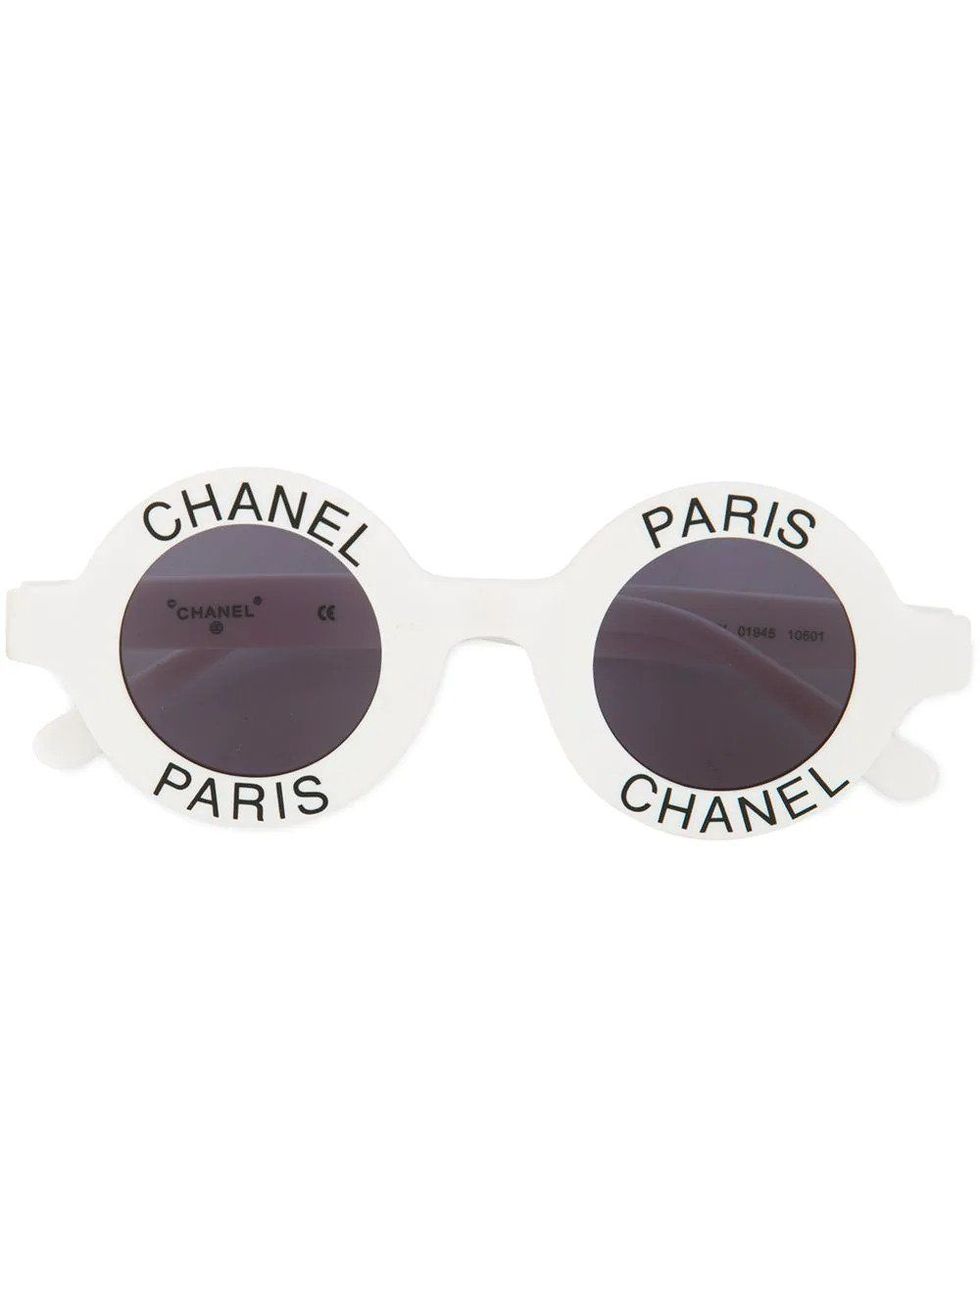 chanel glasses with chanel on top